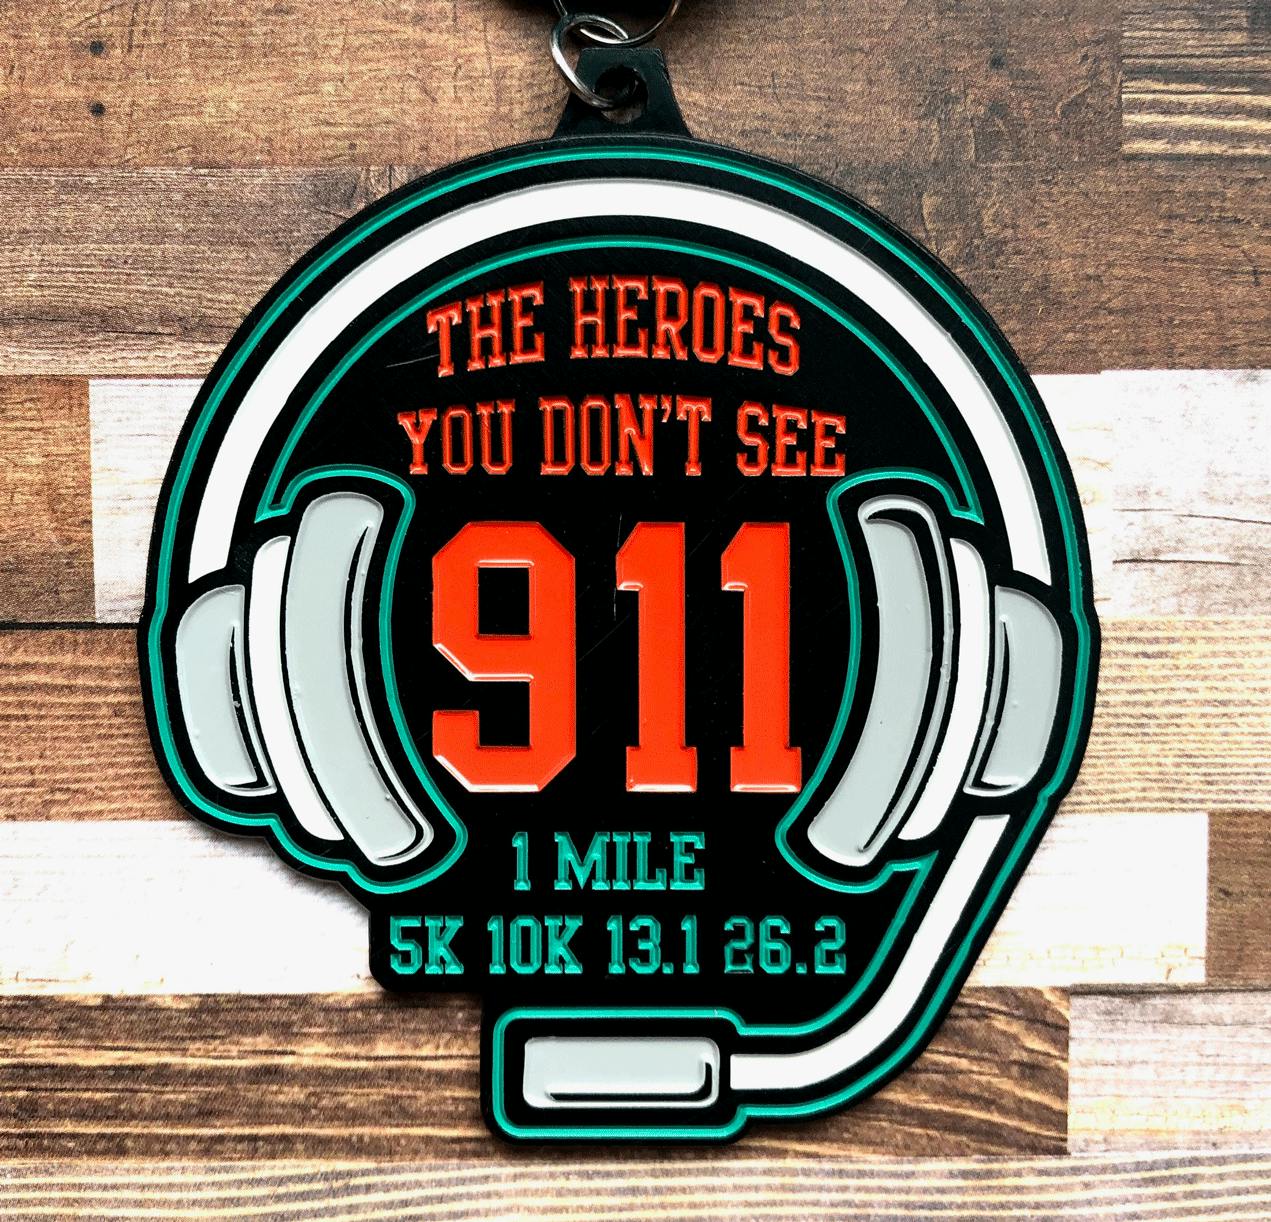 The Heroes You Don't See 1 M 5K 10K 13.1 26.2 -Rochester